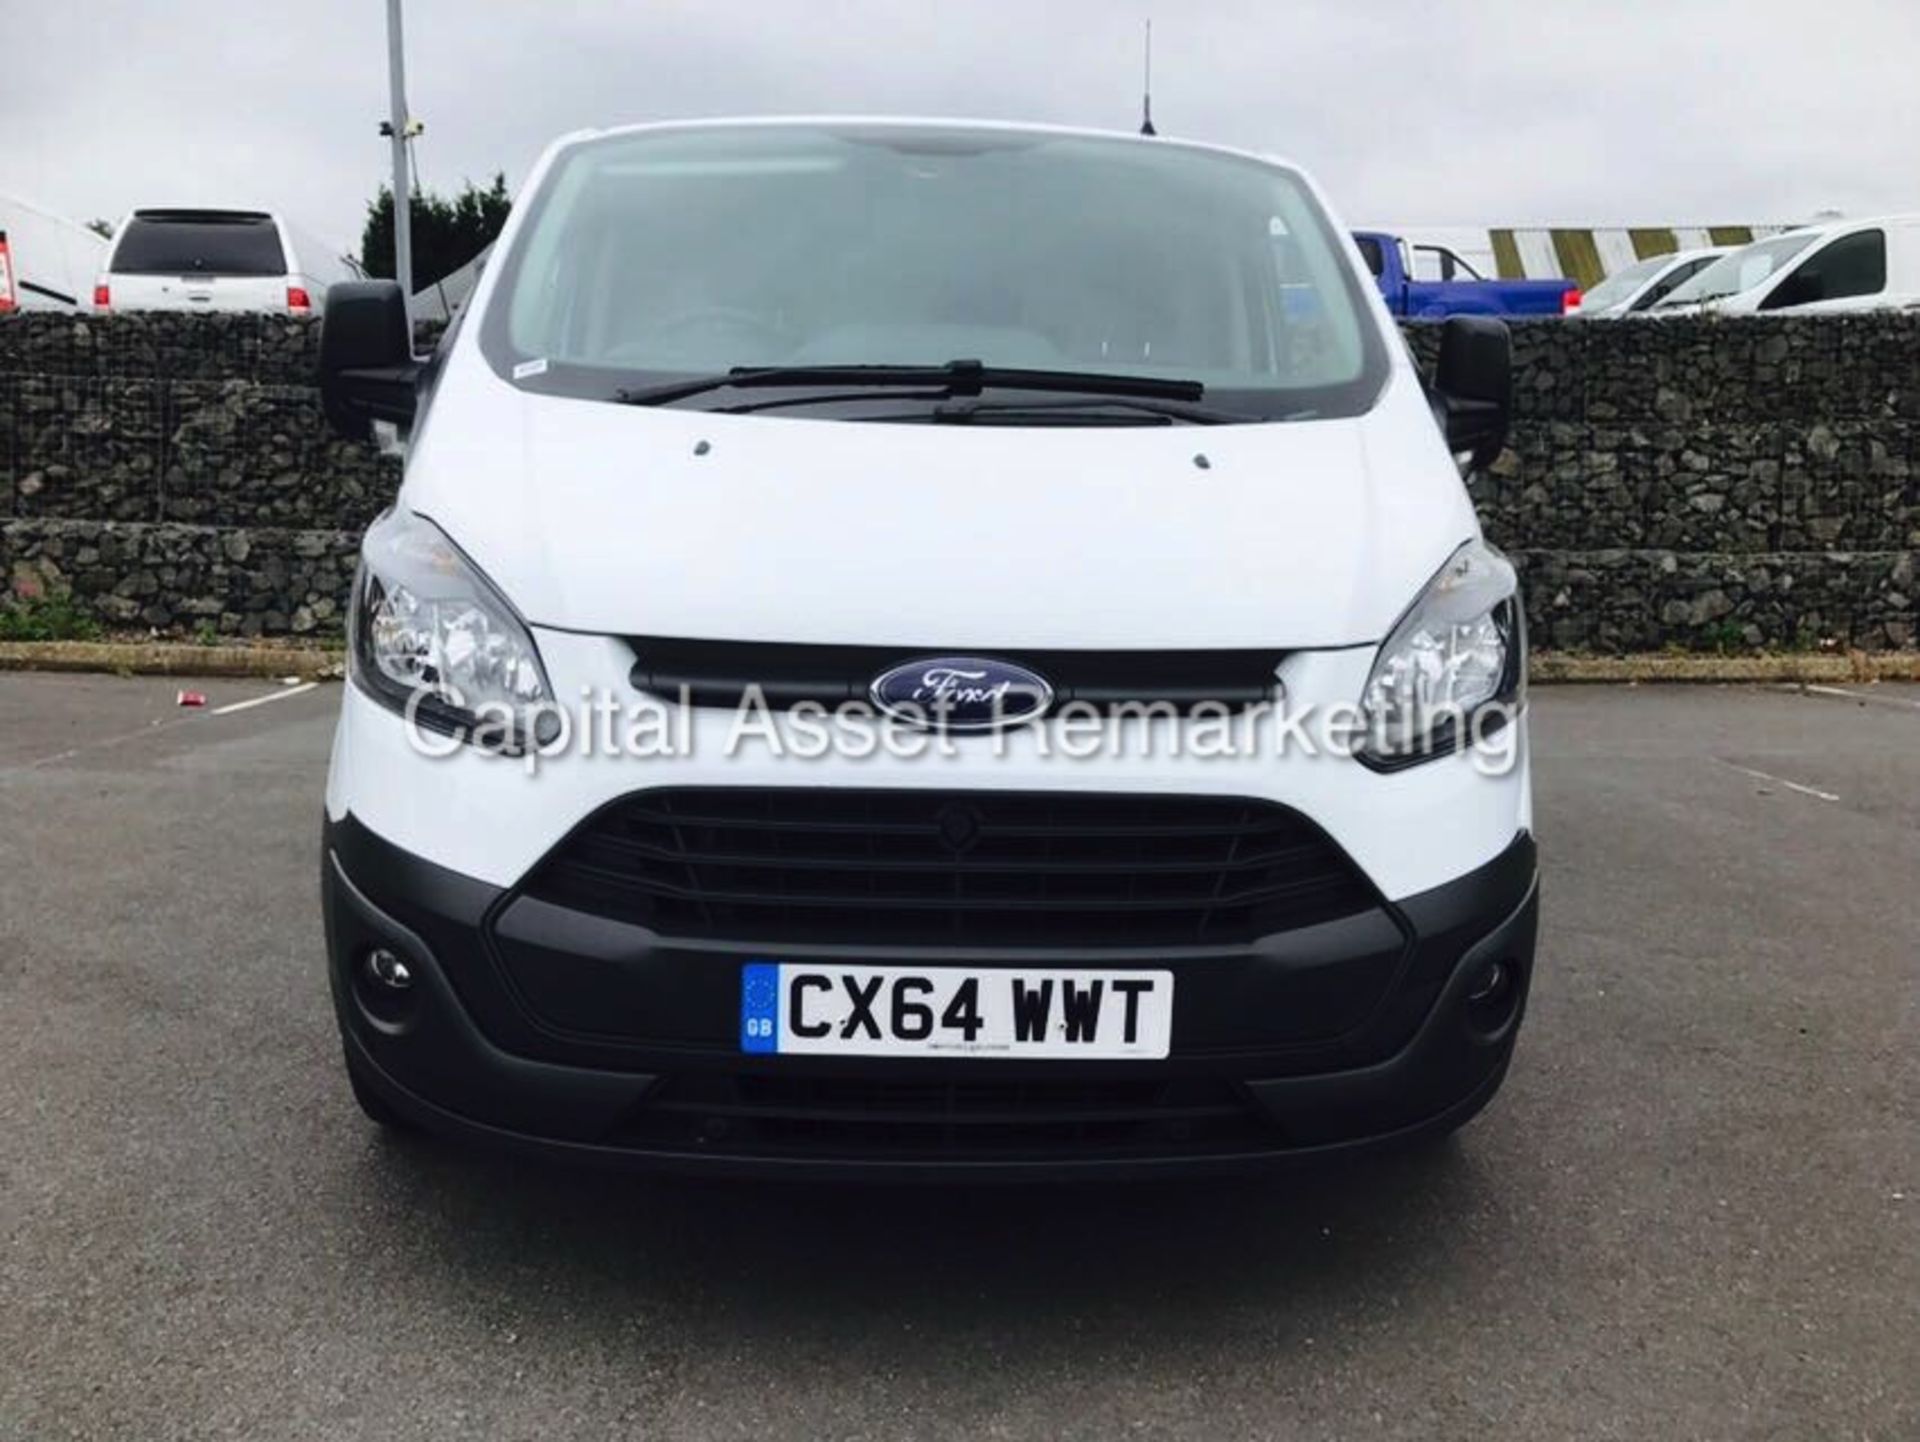 FORD TRANSIT CUSTOM 2.2TDCI "125" TREND SPEC - AIR CON - 64 REG - 1 OWNER - GREAT SPEC - WOW!!!! - Image 4 of 17